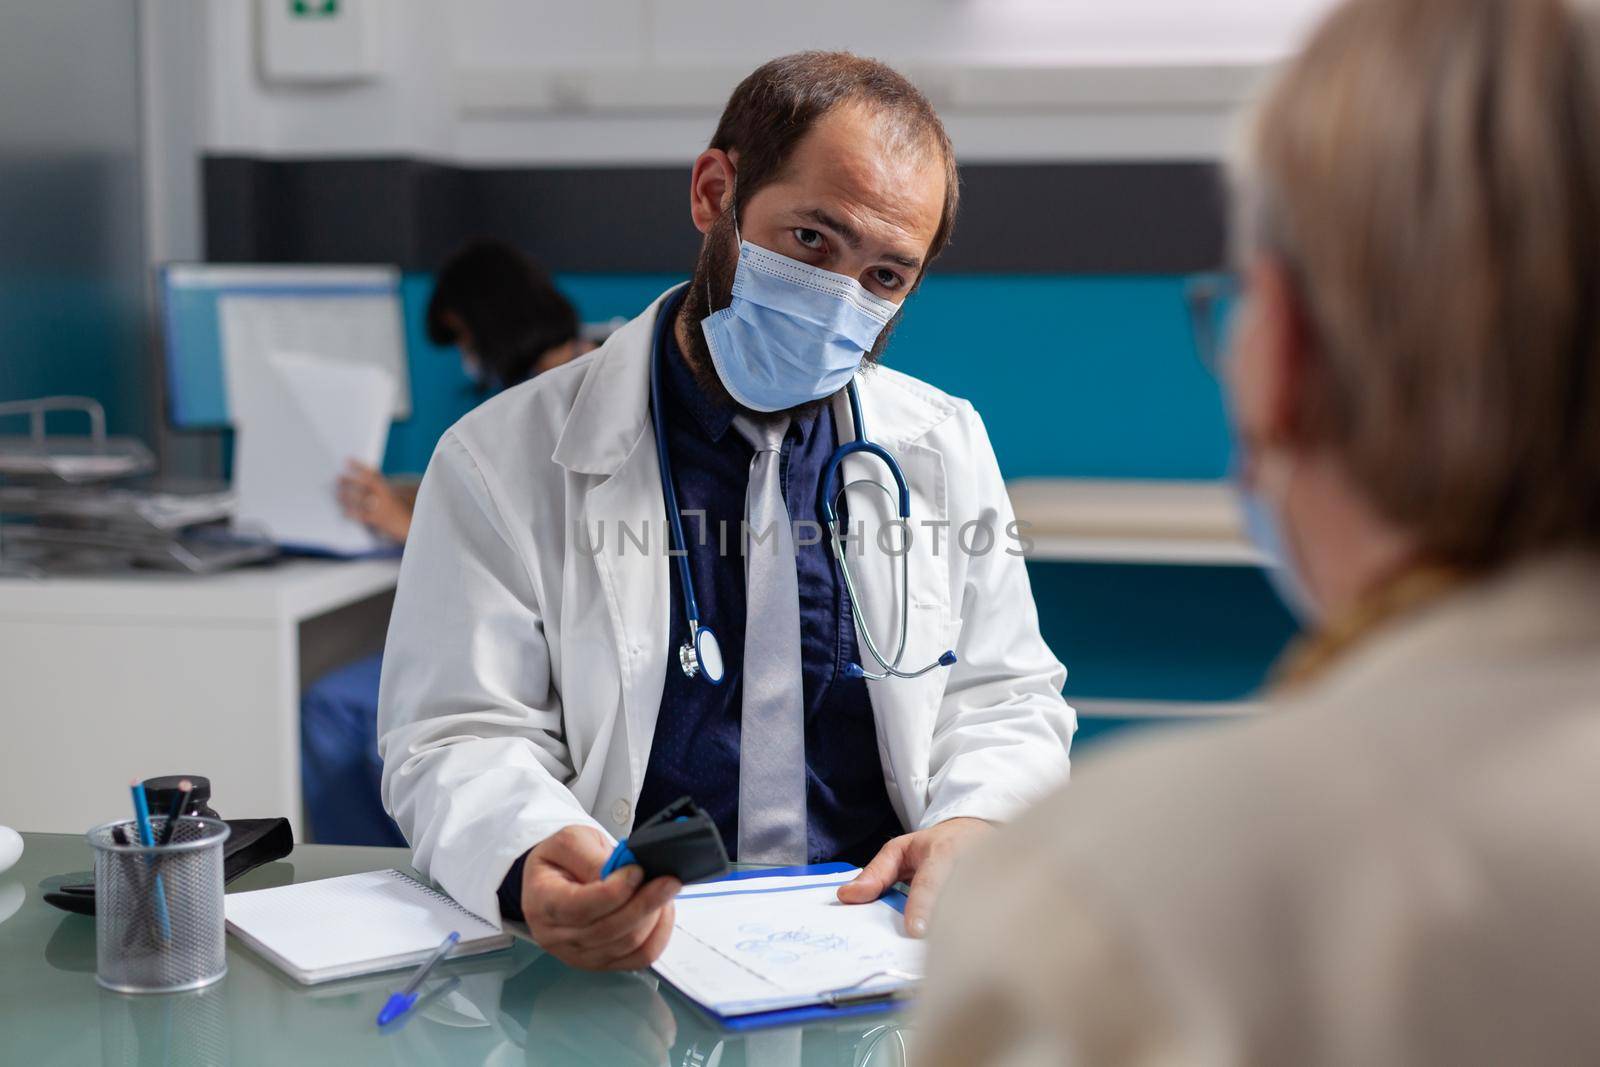 Doctor putting medical seal on prescription paper by DCStudio